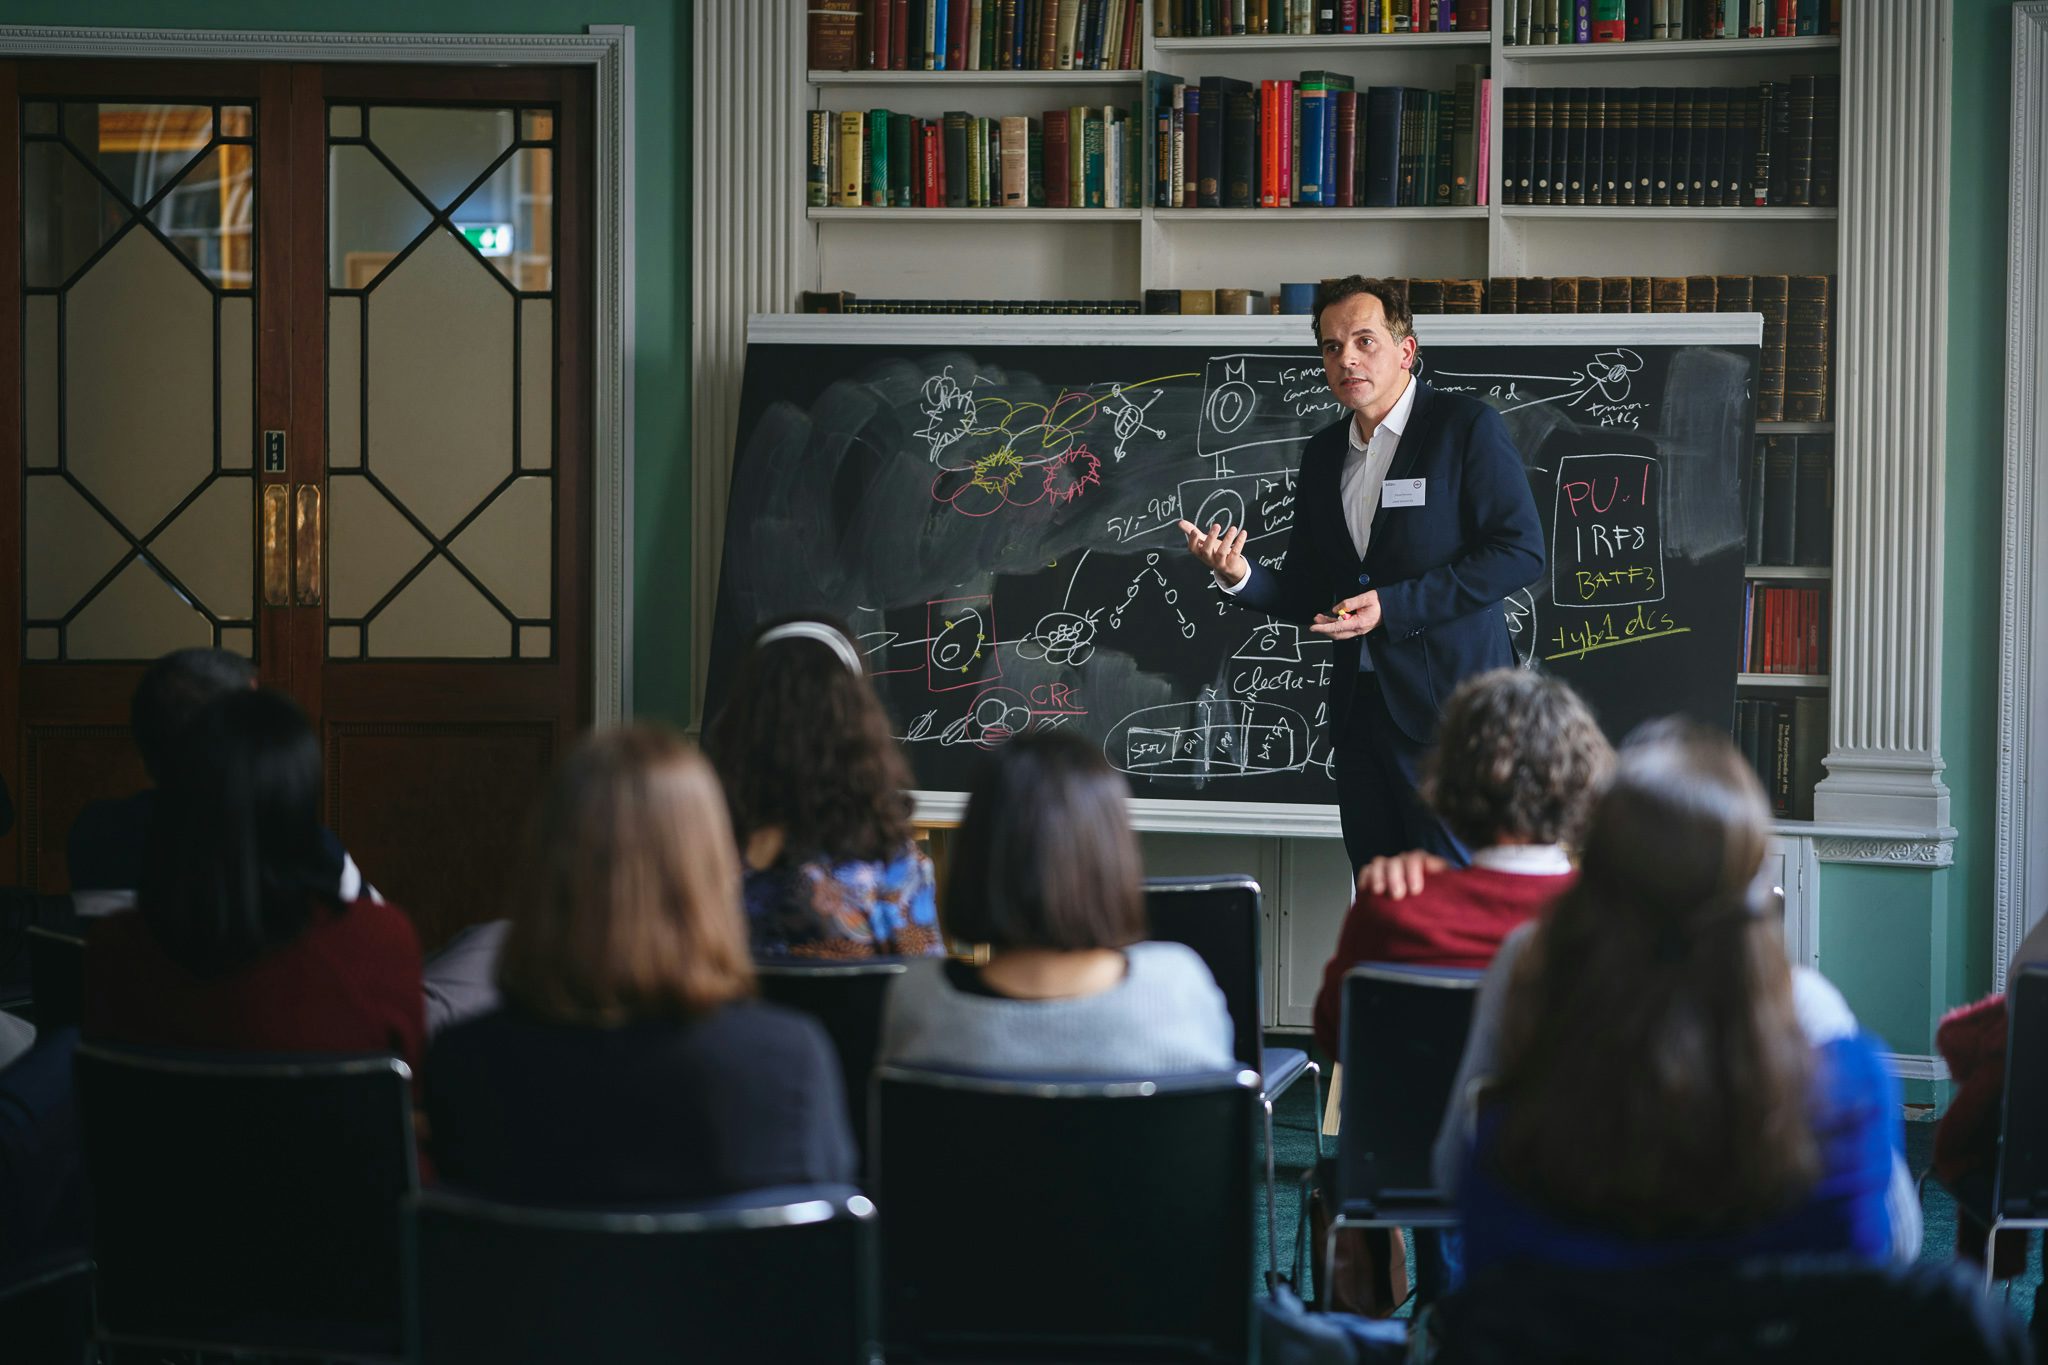 In the Library at the Royal Institution, Filipe Pereira gives a chalk talk on technologies for hematopoietic cell fate reprogramming.